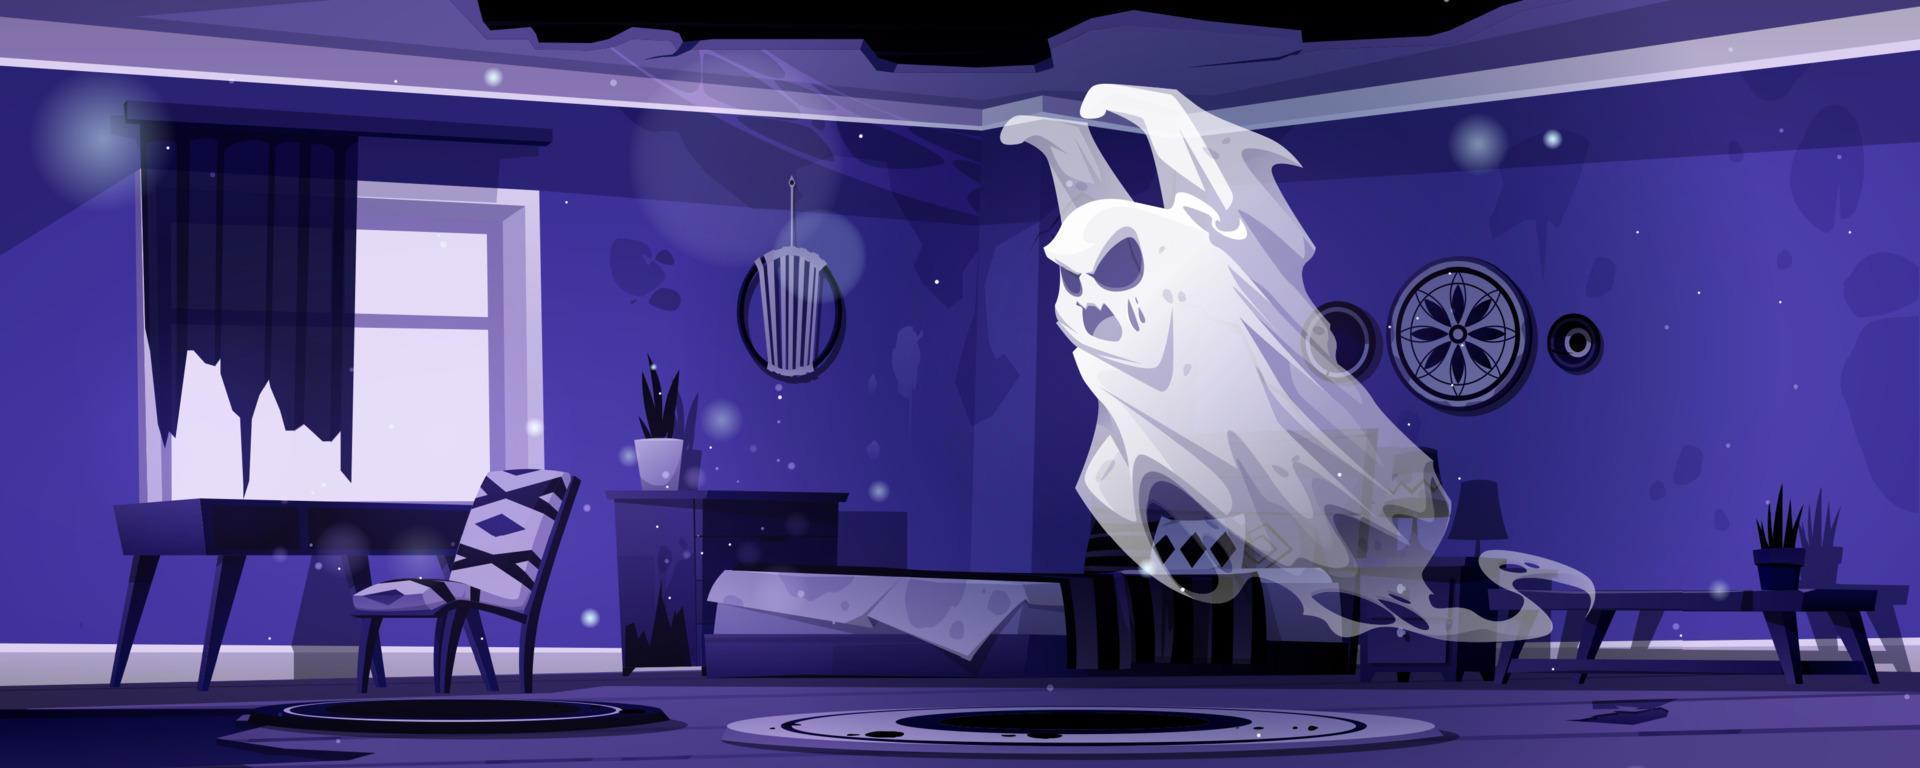 Ghost in night abandoned bedroom, scary spook vector